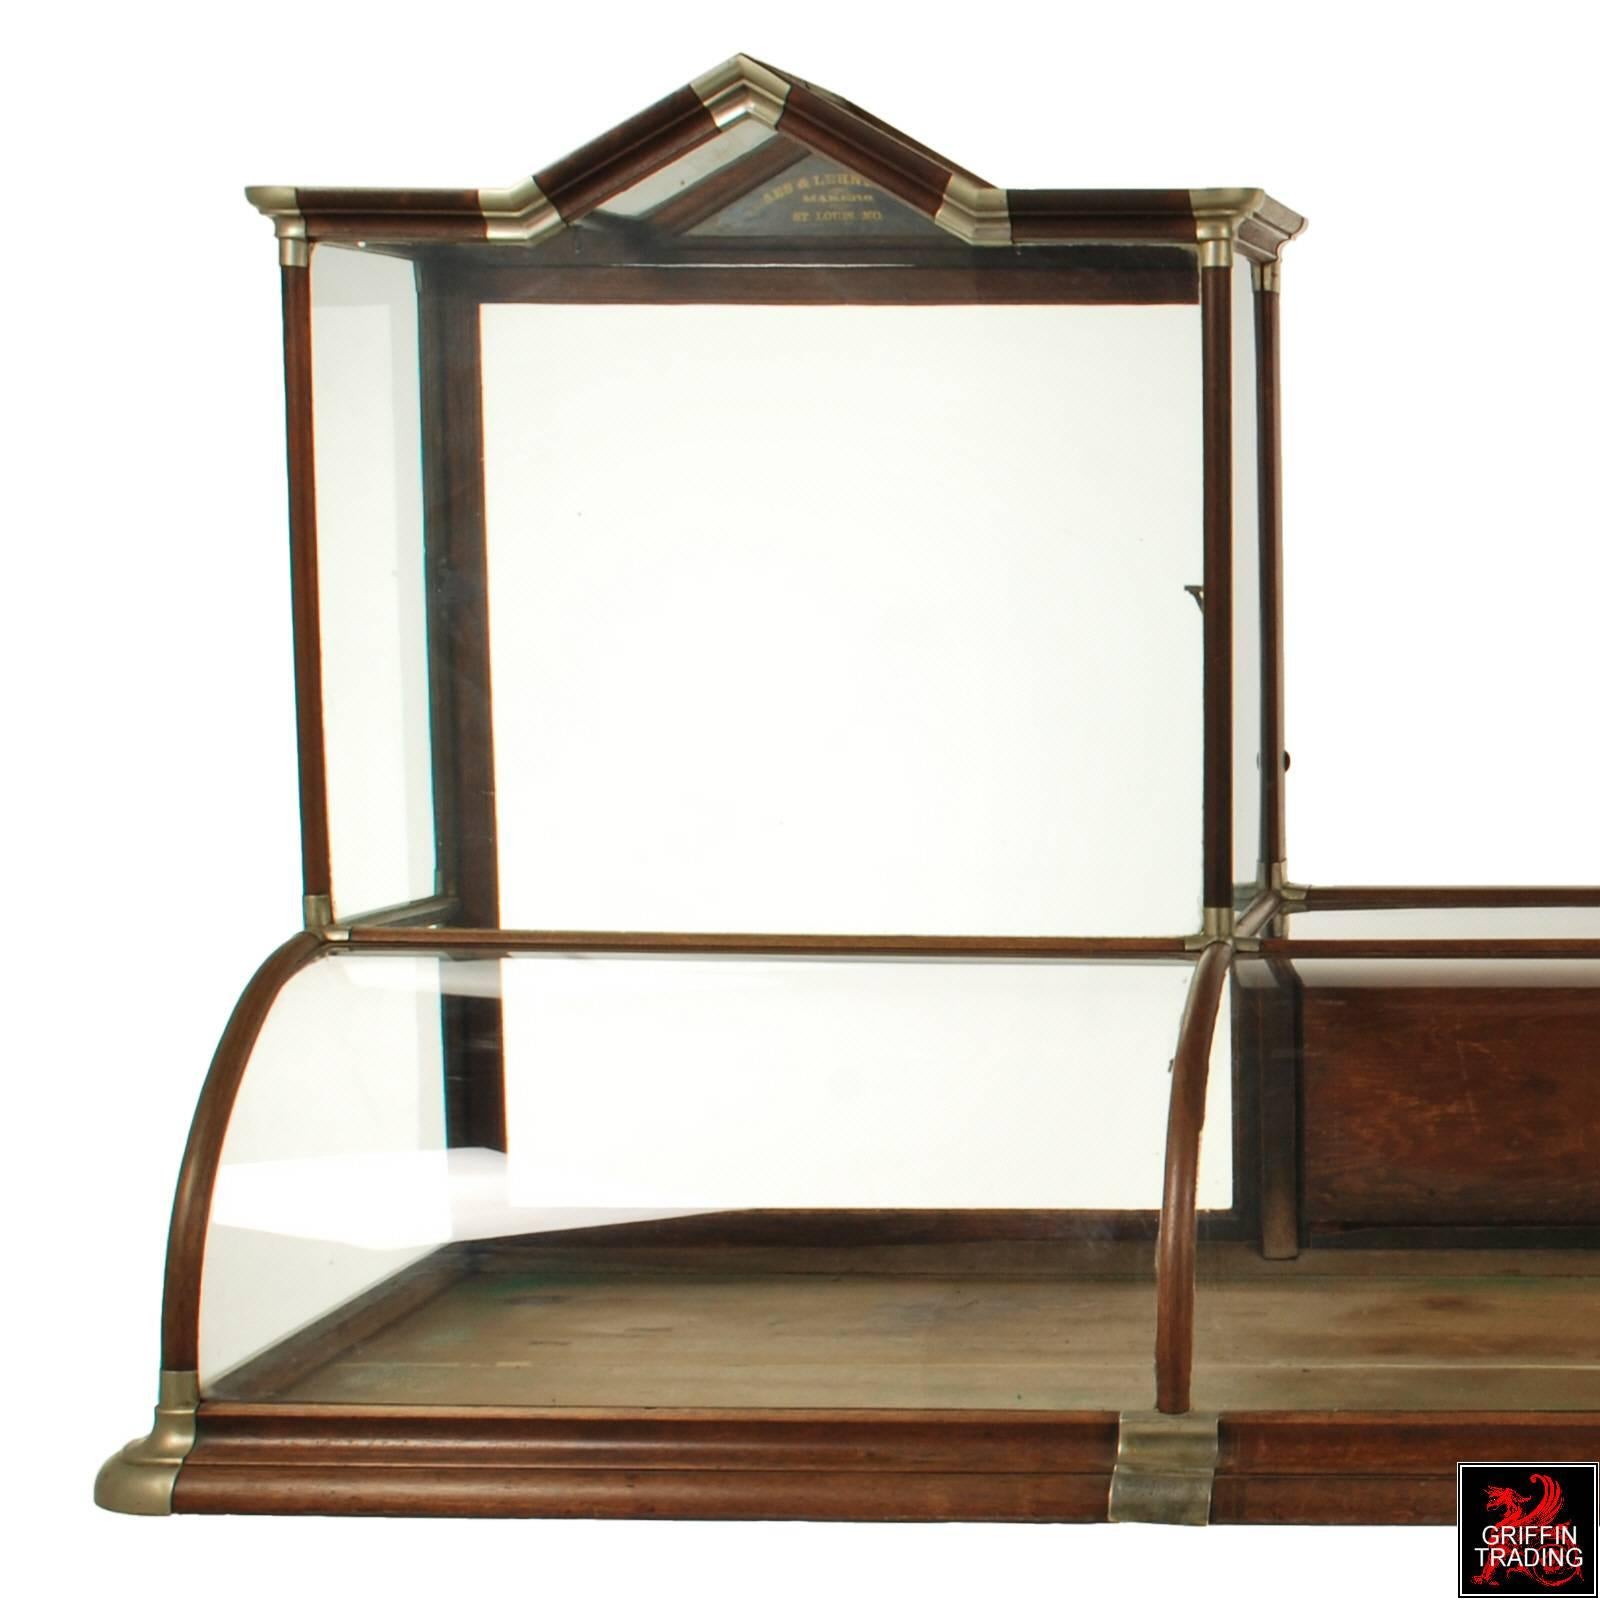 Hand-Crafted Antique Curved Glass Counter Top Showcase or Display Cabinet with Gable Top For Sale